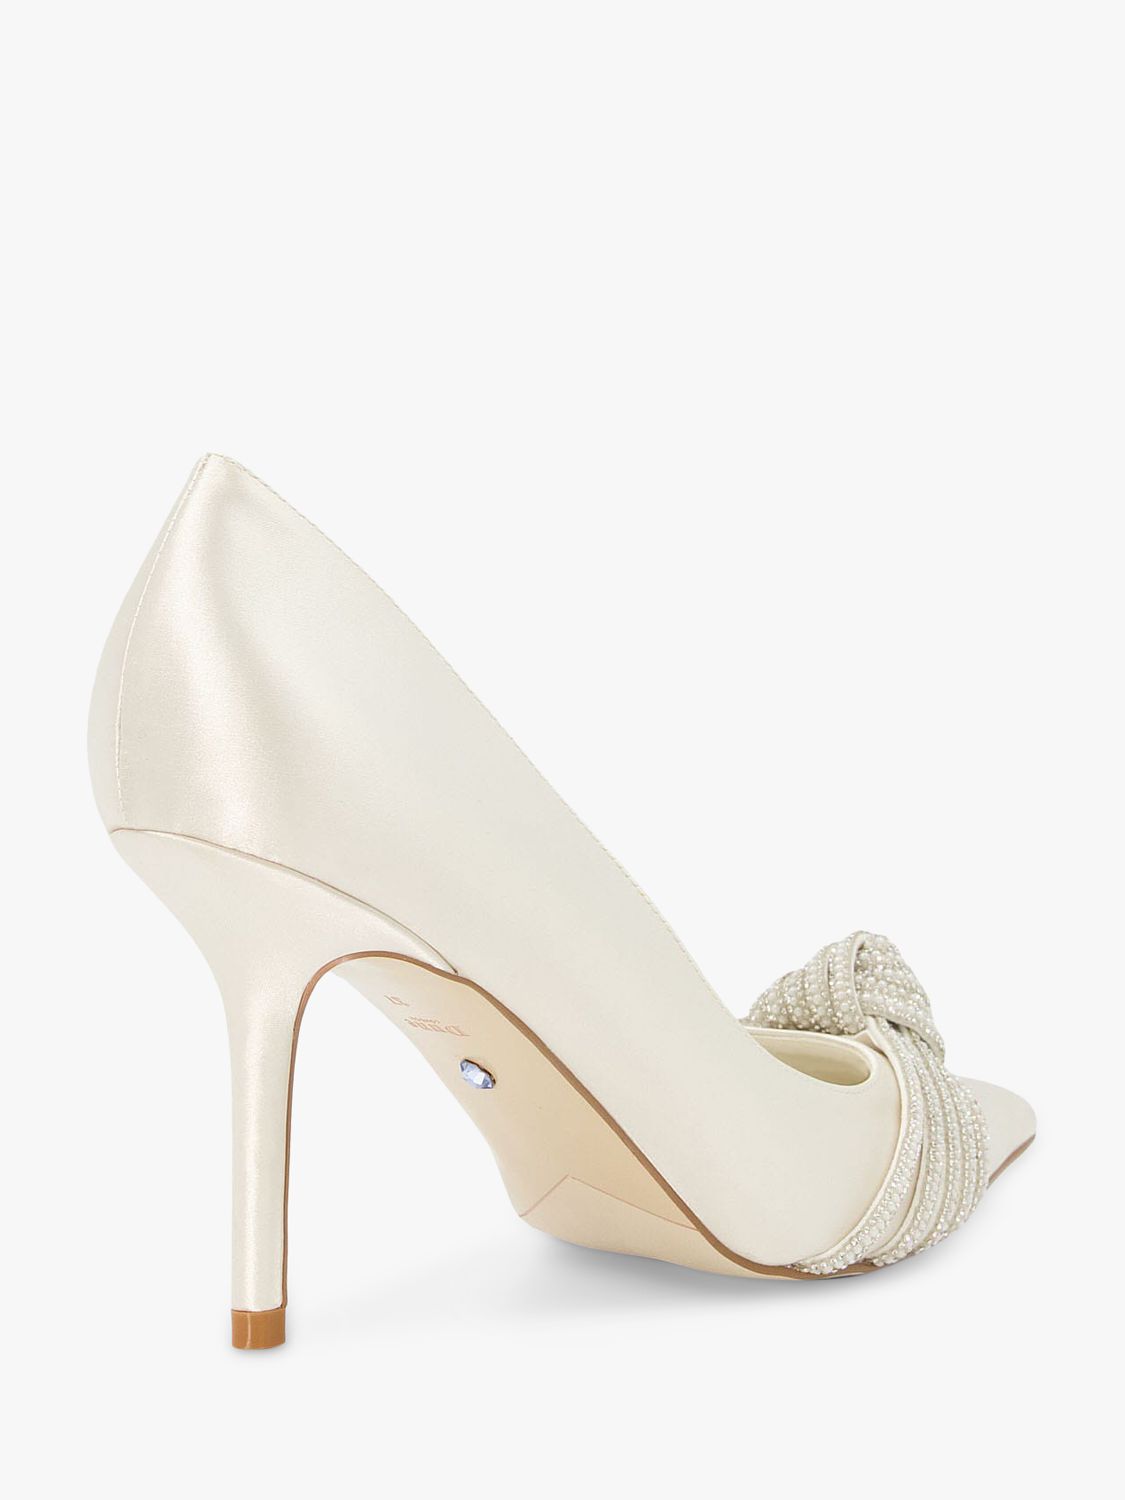 Dune Bridal Collection Beauties Satin High Heel Court Shoes, Ivory, 3